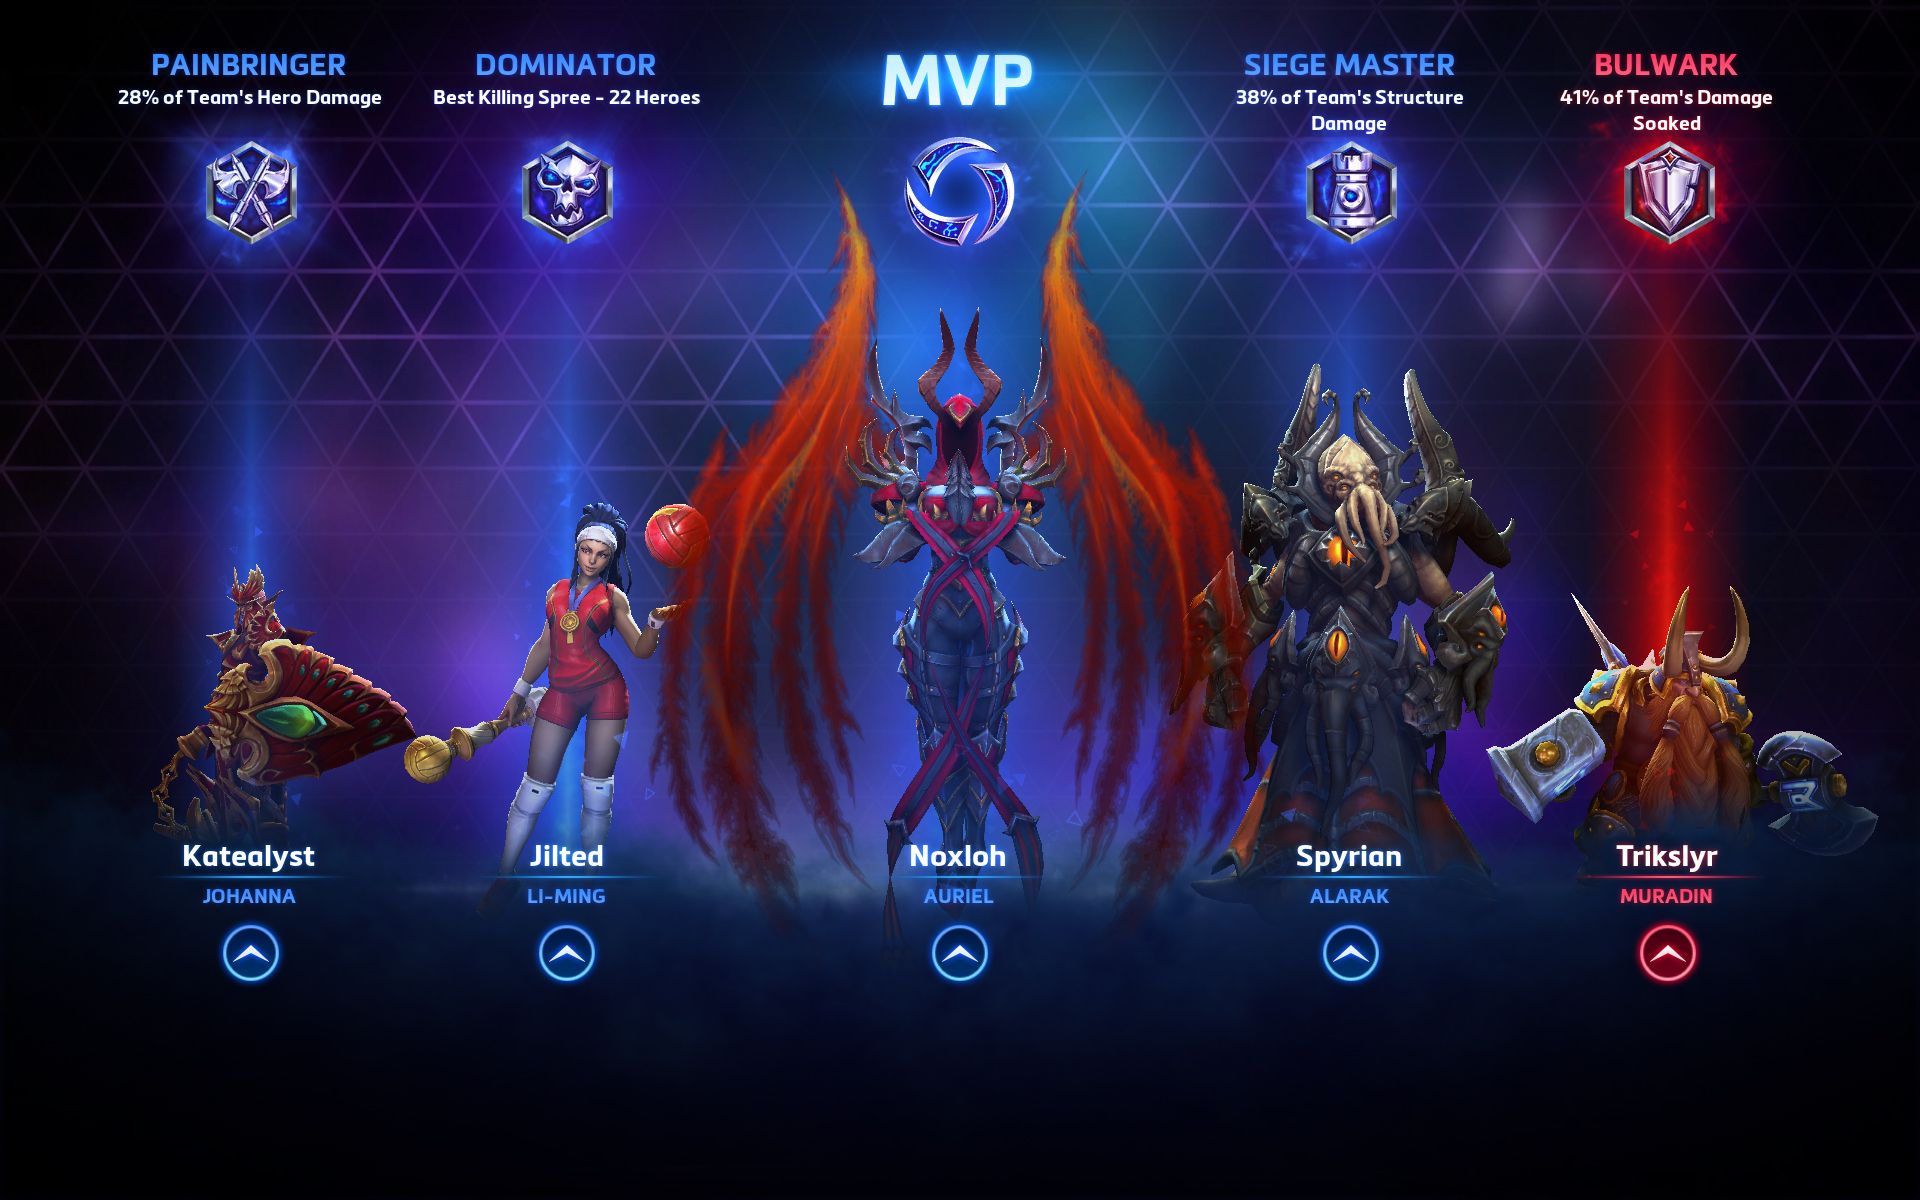 Heroes Of The Storm Pro Players Are Reacting To Blizzard Killing Its eSports Future